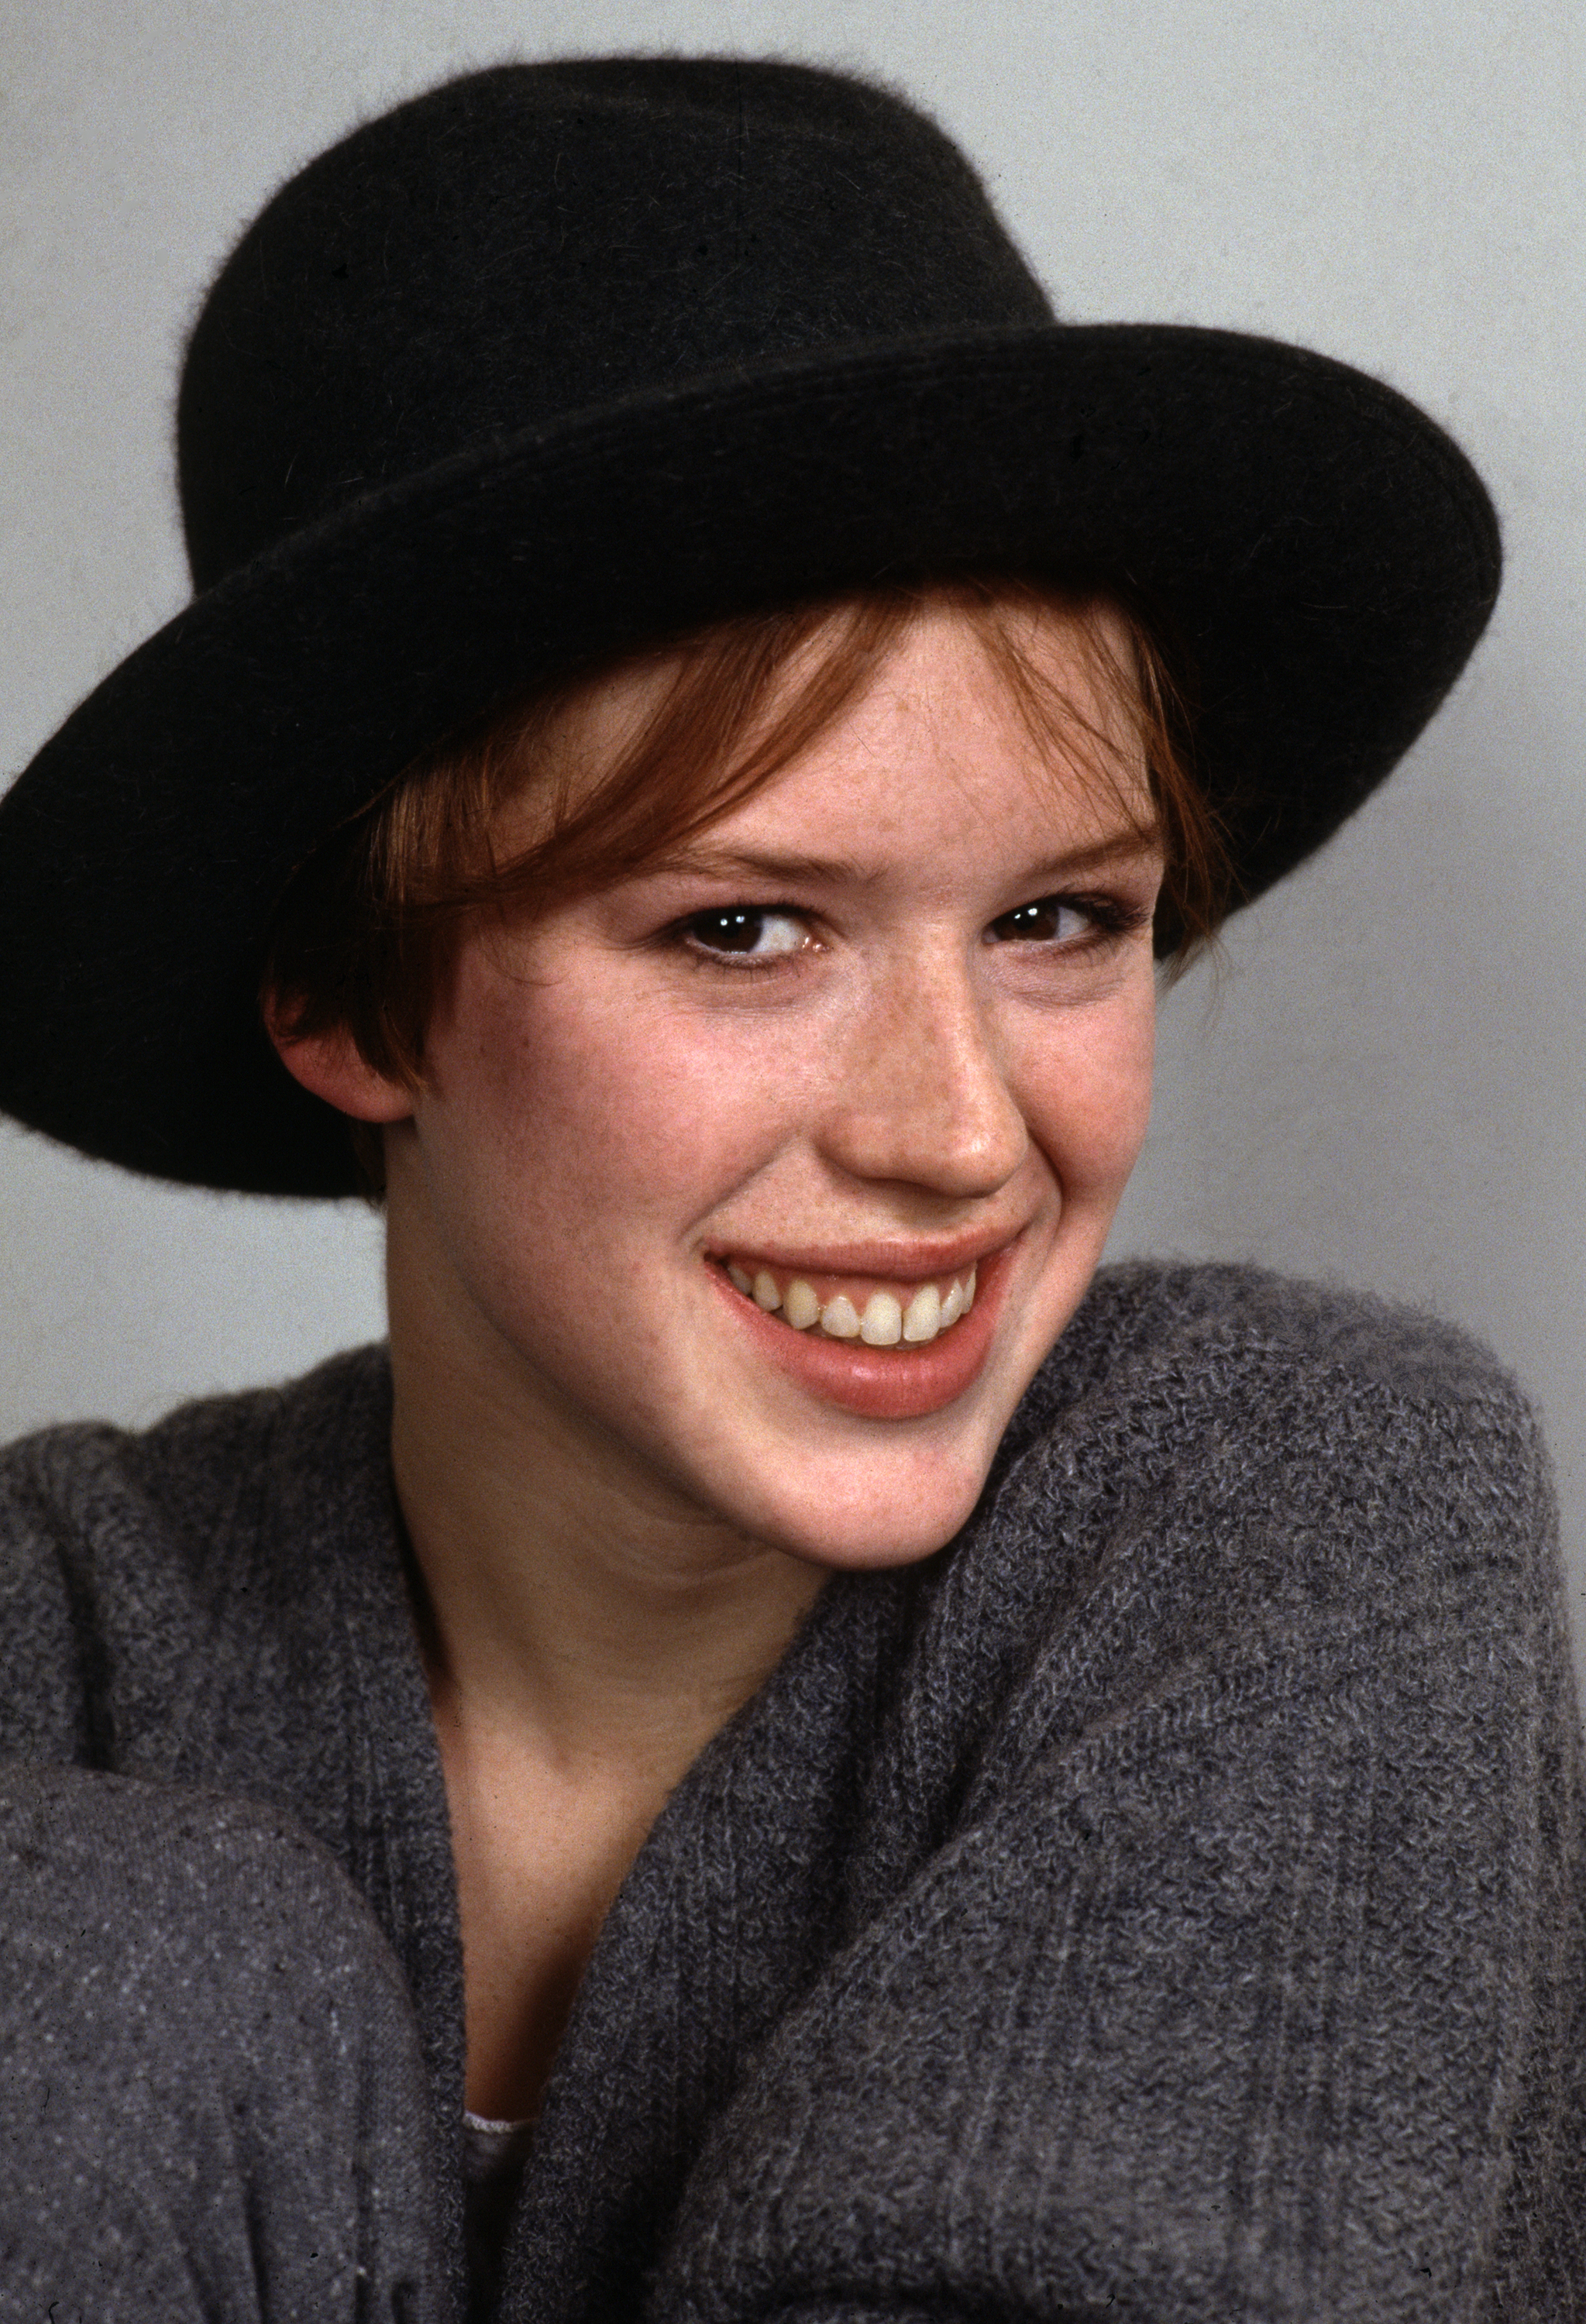 Molly Ringwald in Los Angeles, California on January 30, 1985 | Source: Getty Images